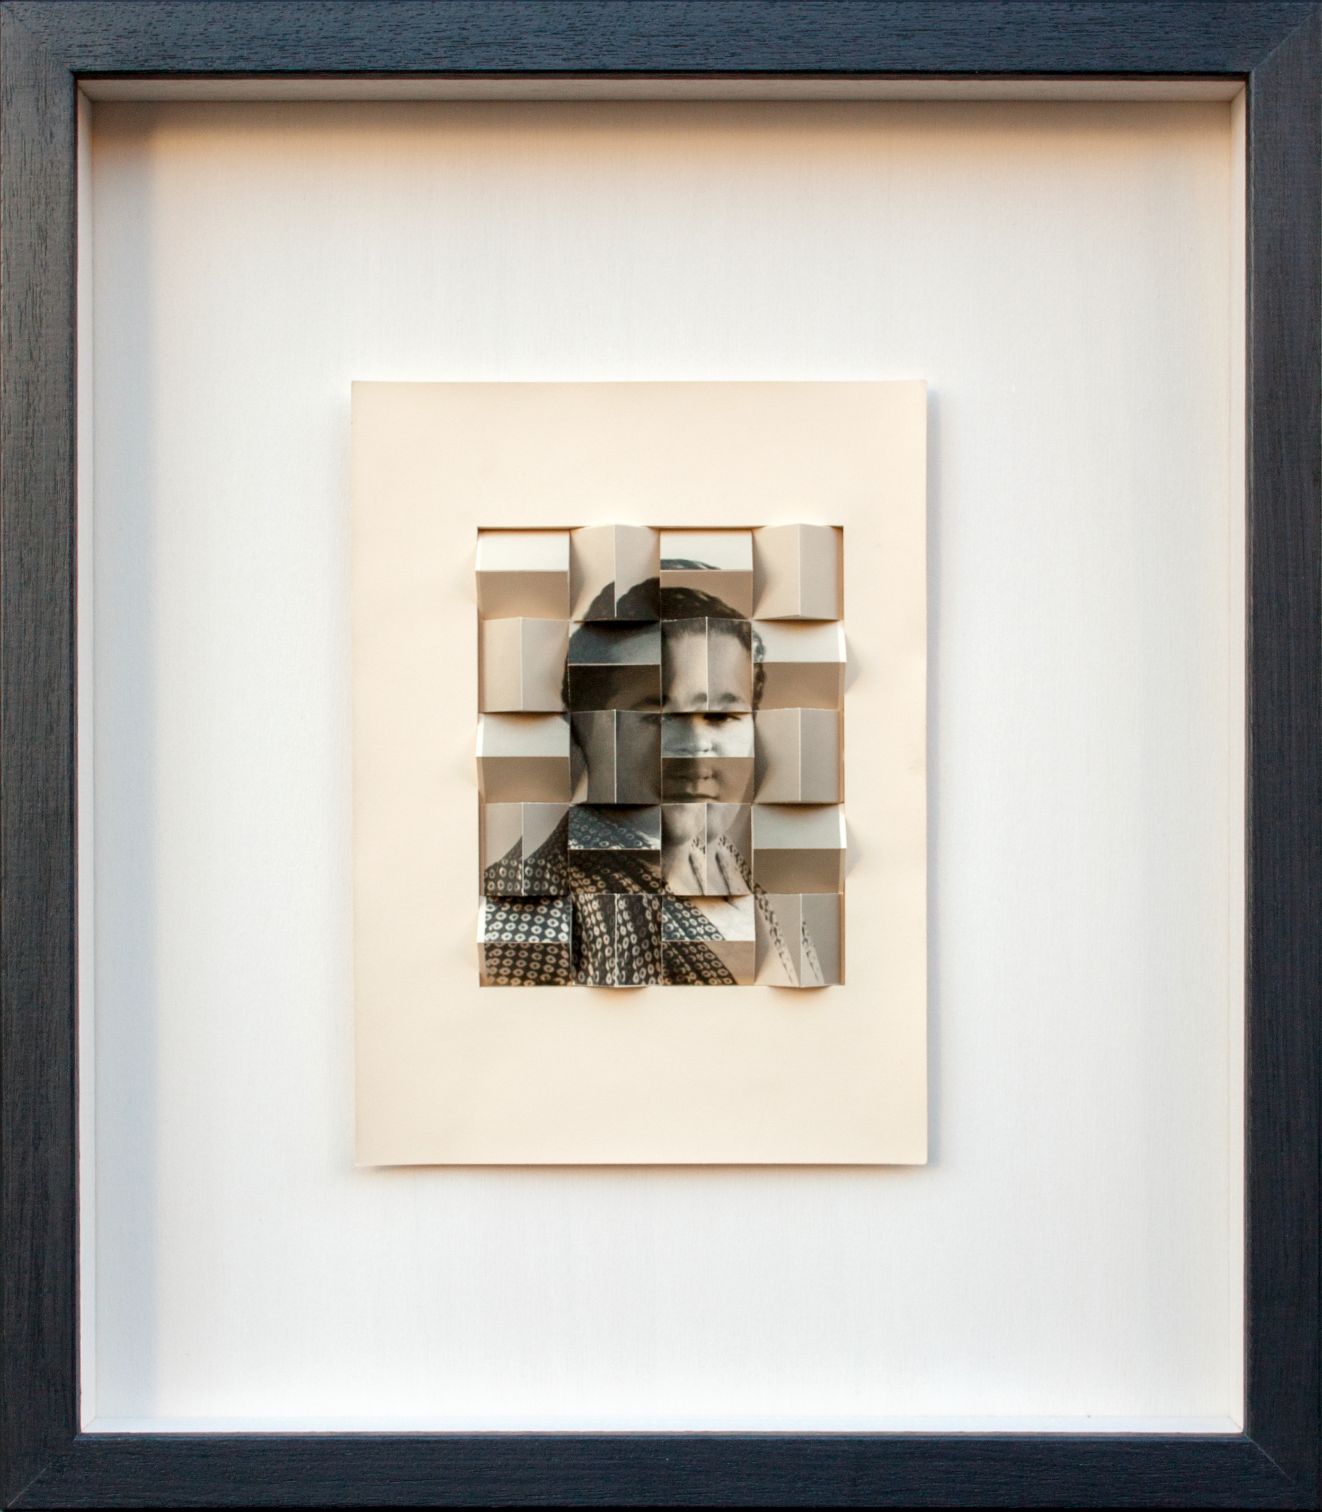 2016, vintage photo on three-dimensional wooden structure, in wooden frame, 40 x 35 cm